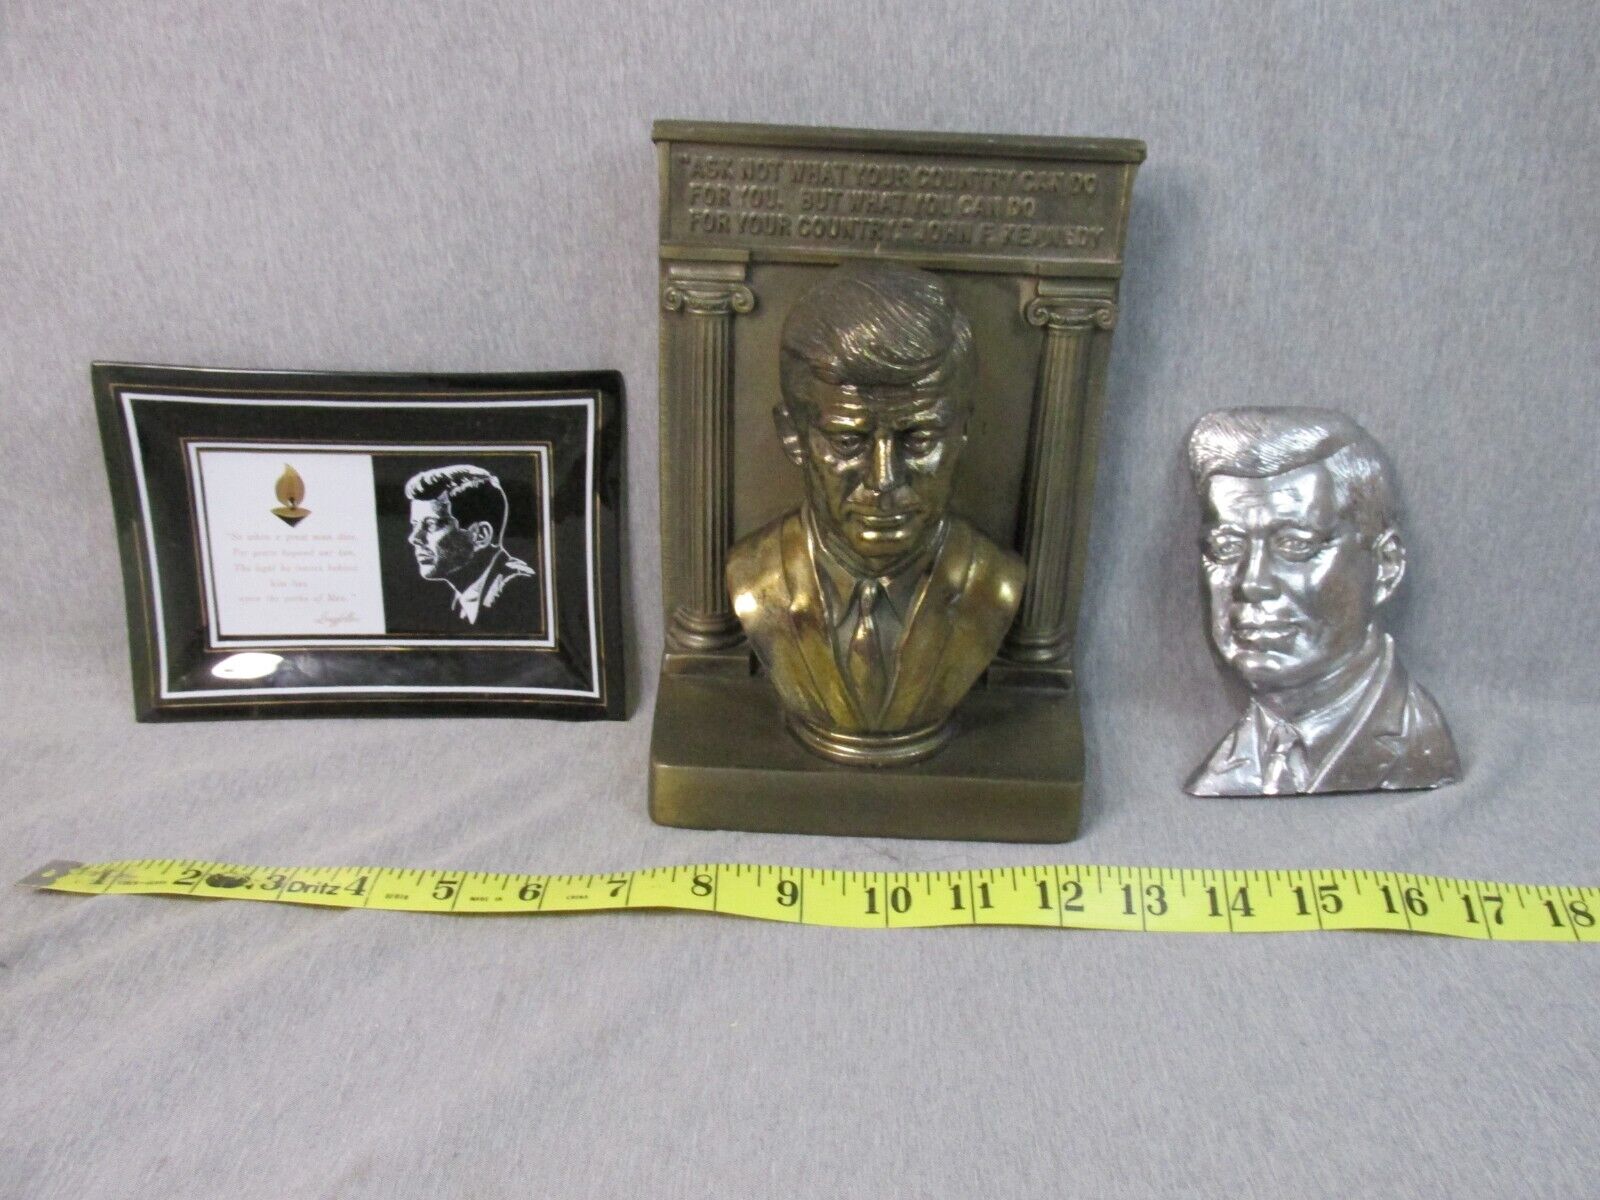 LOT OF 3 JOHN F KENNEDY ITEMS ASH TRAY-PAPERWEIGHT BUST-BOOK END BUST